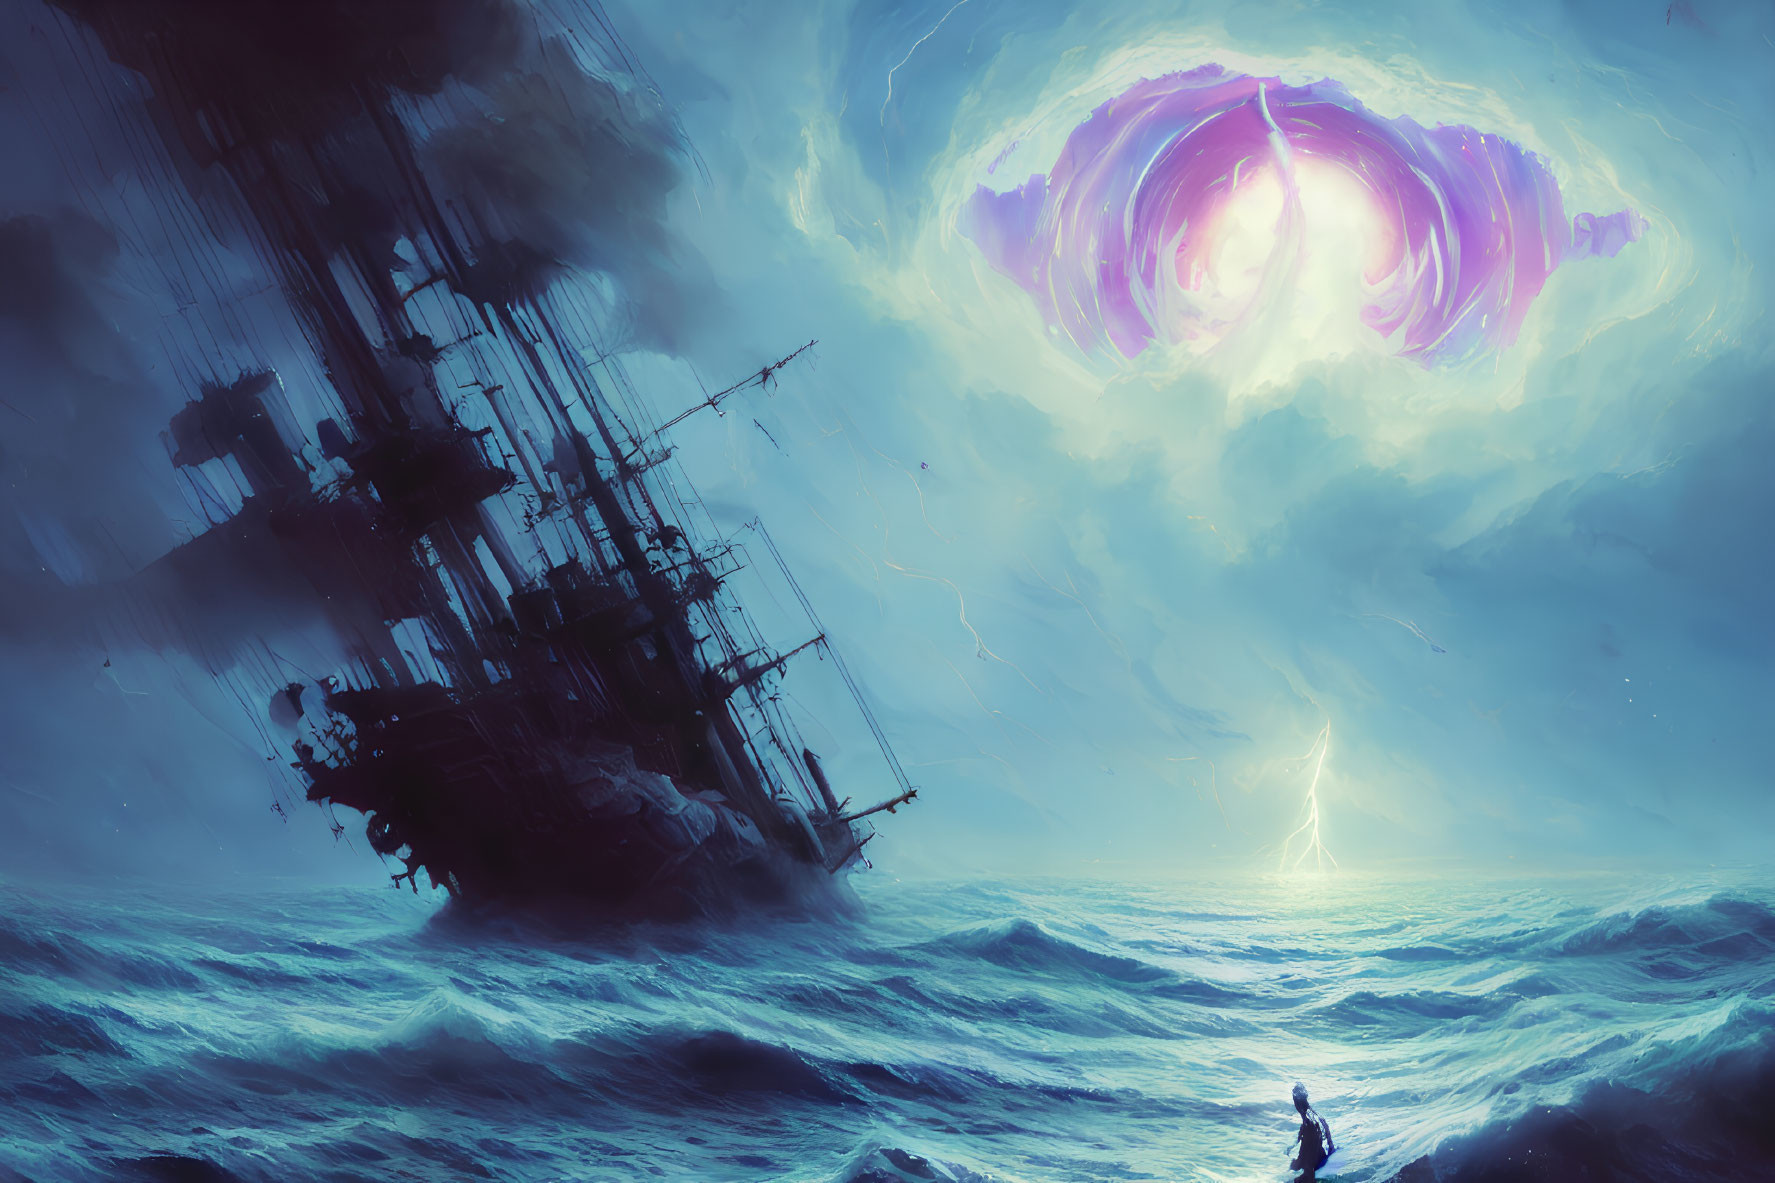 Surreal seascape with ship, purple portal, lightning, and lone figure